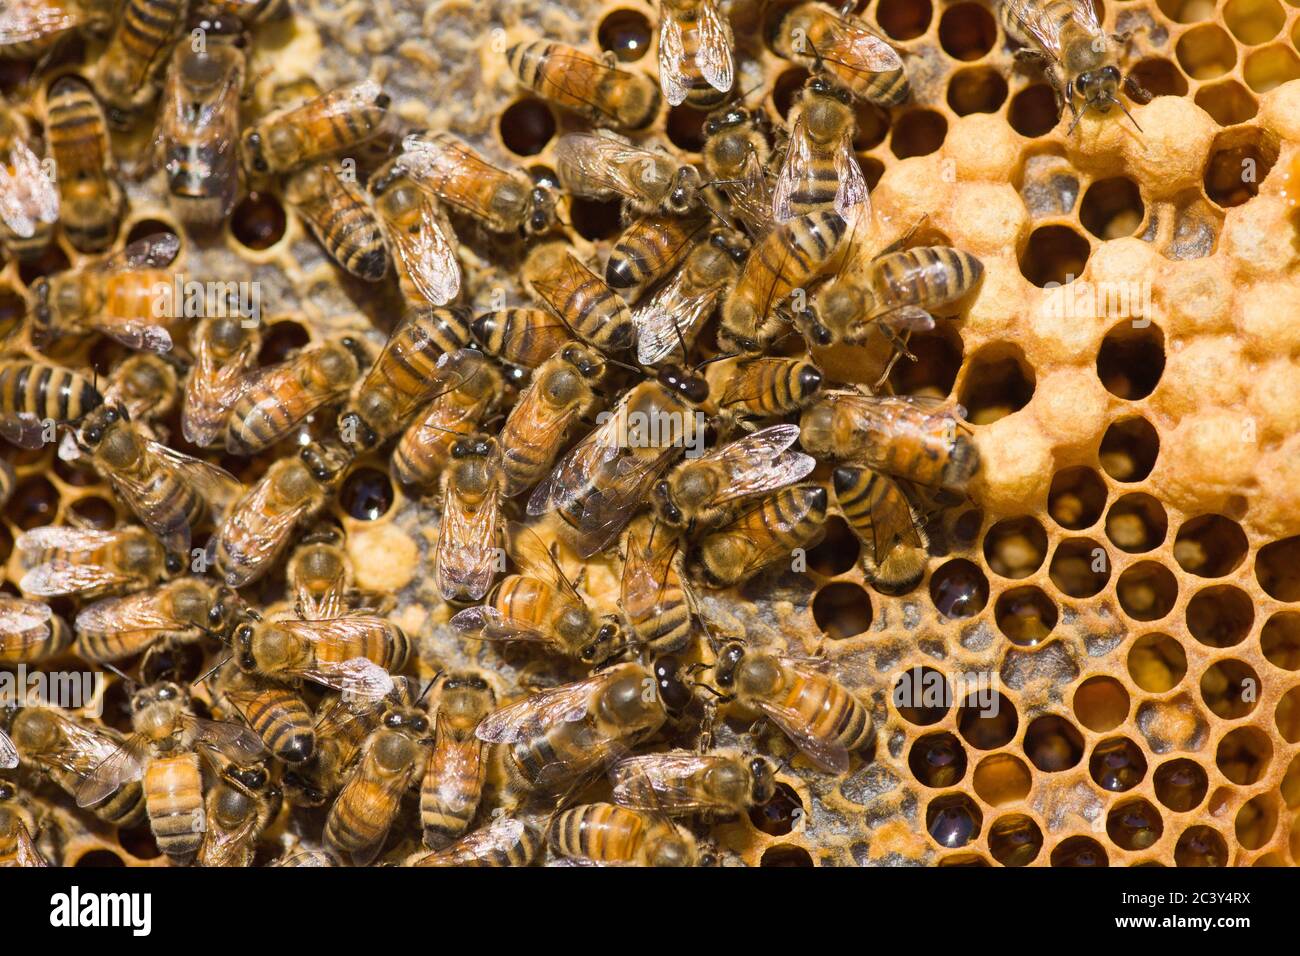 Close-up of frame showing two drone honeybees on the middle of the frame, along with other worker honeybees, honey and pupae in upper right (whitish c Stock Photo